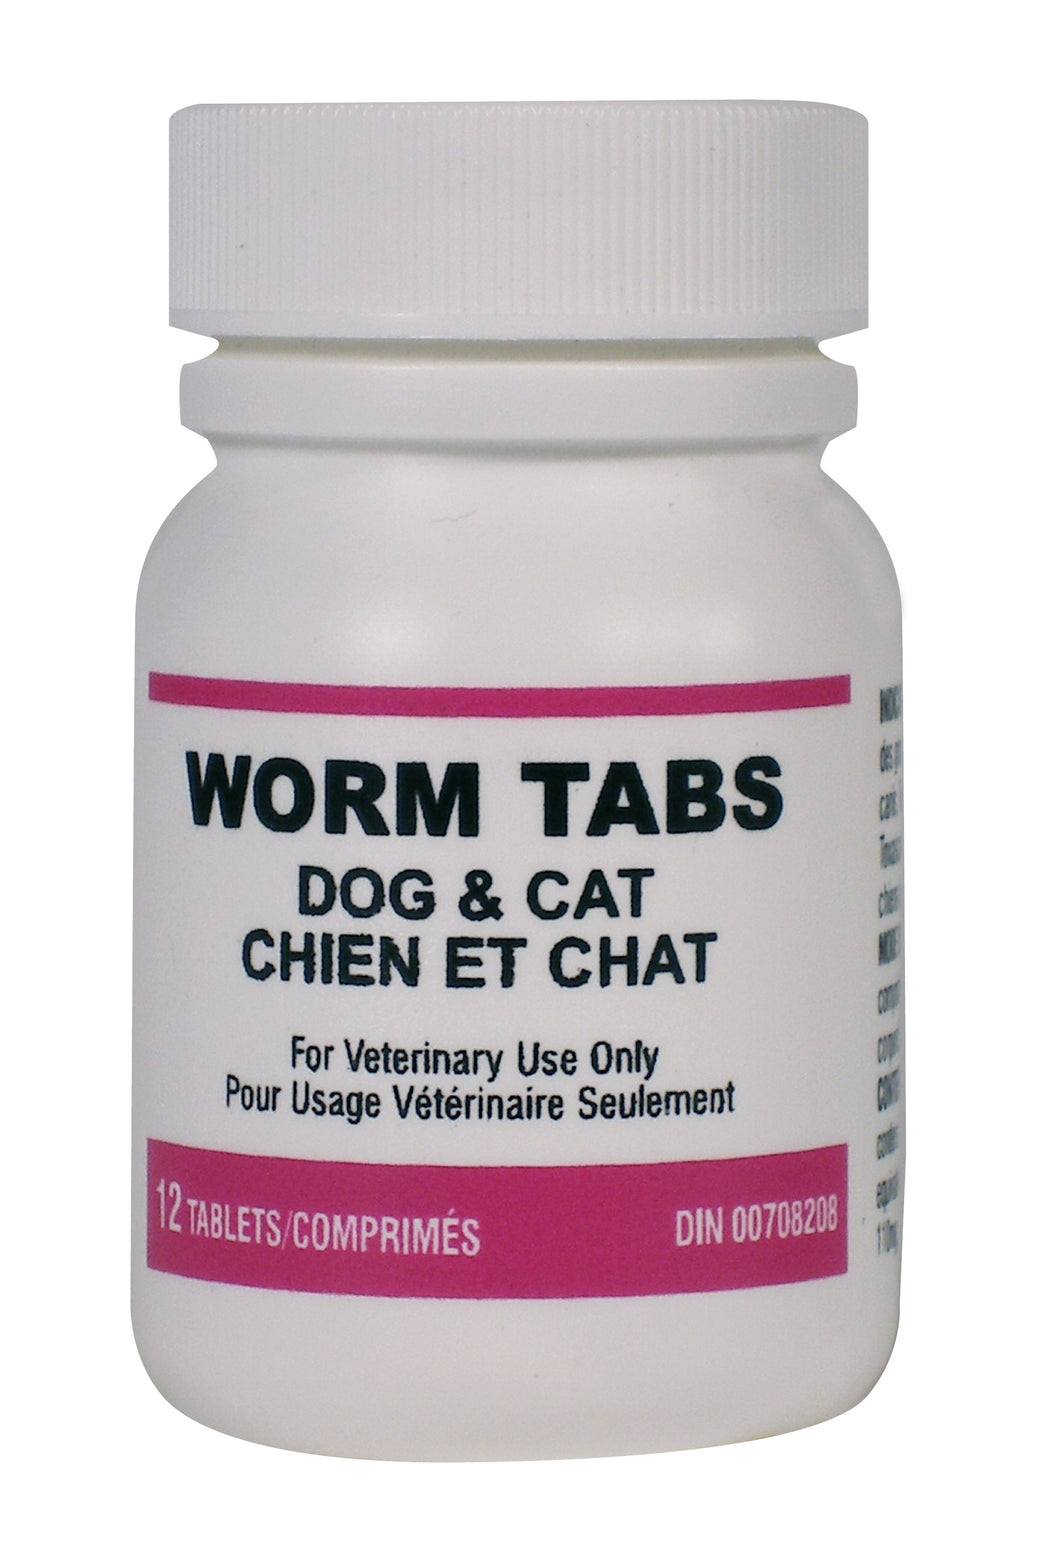 tape worm tabs for cats walmart